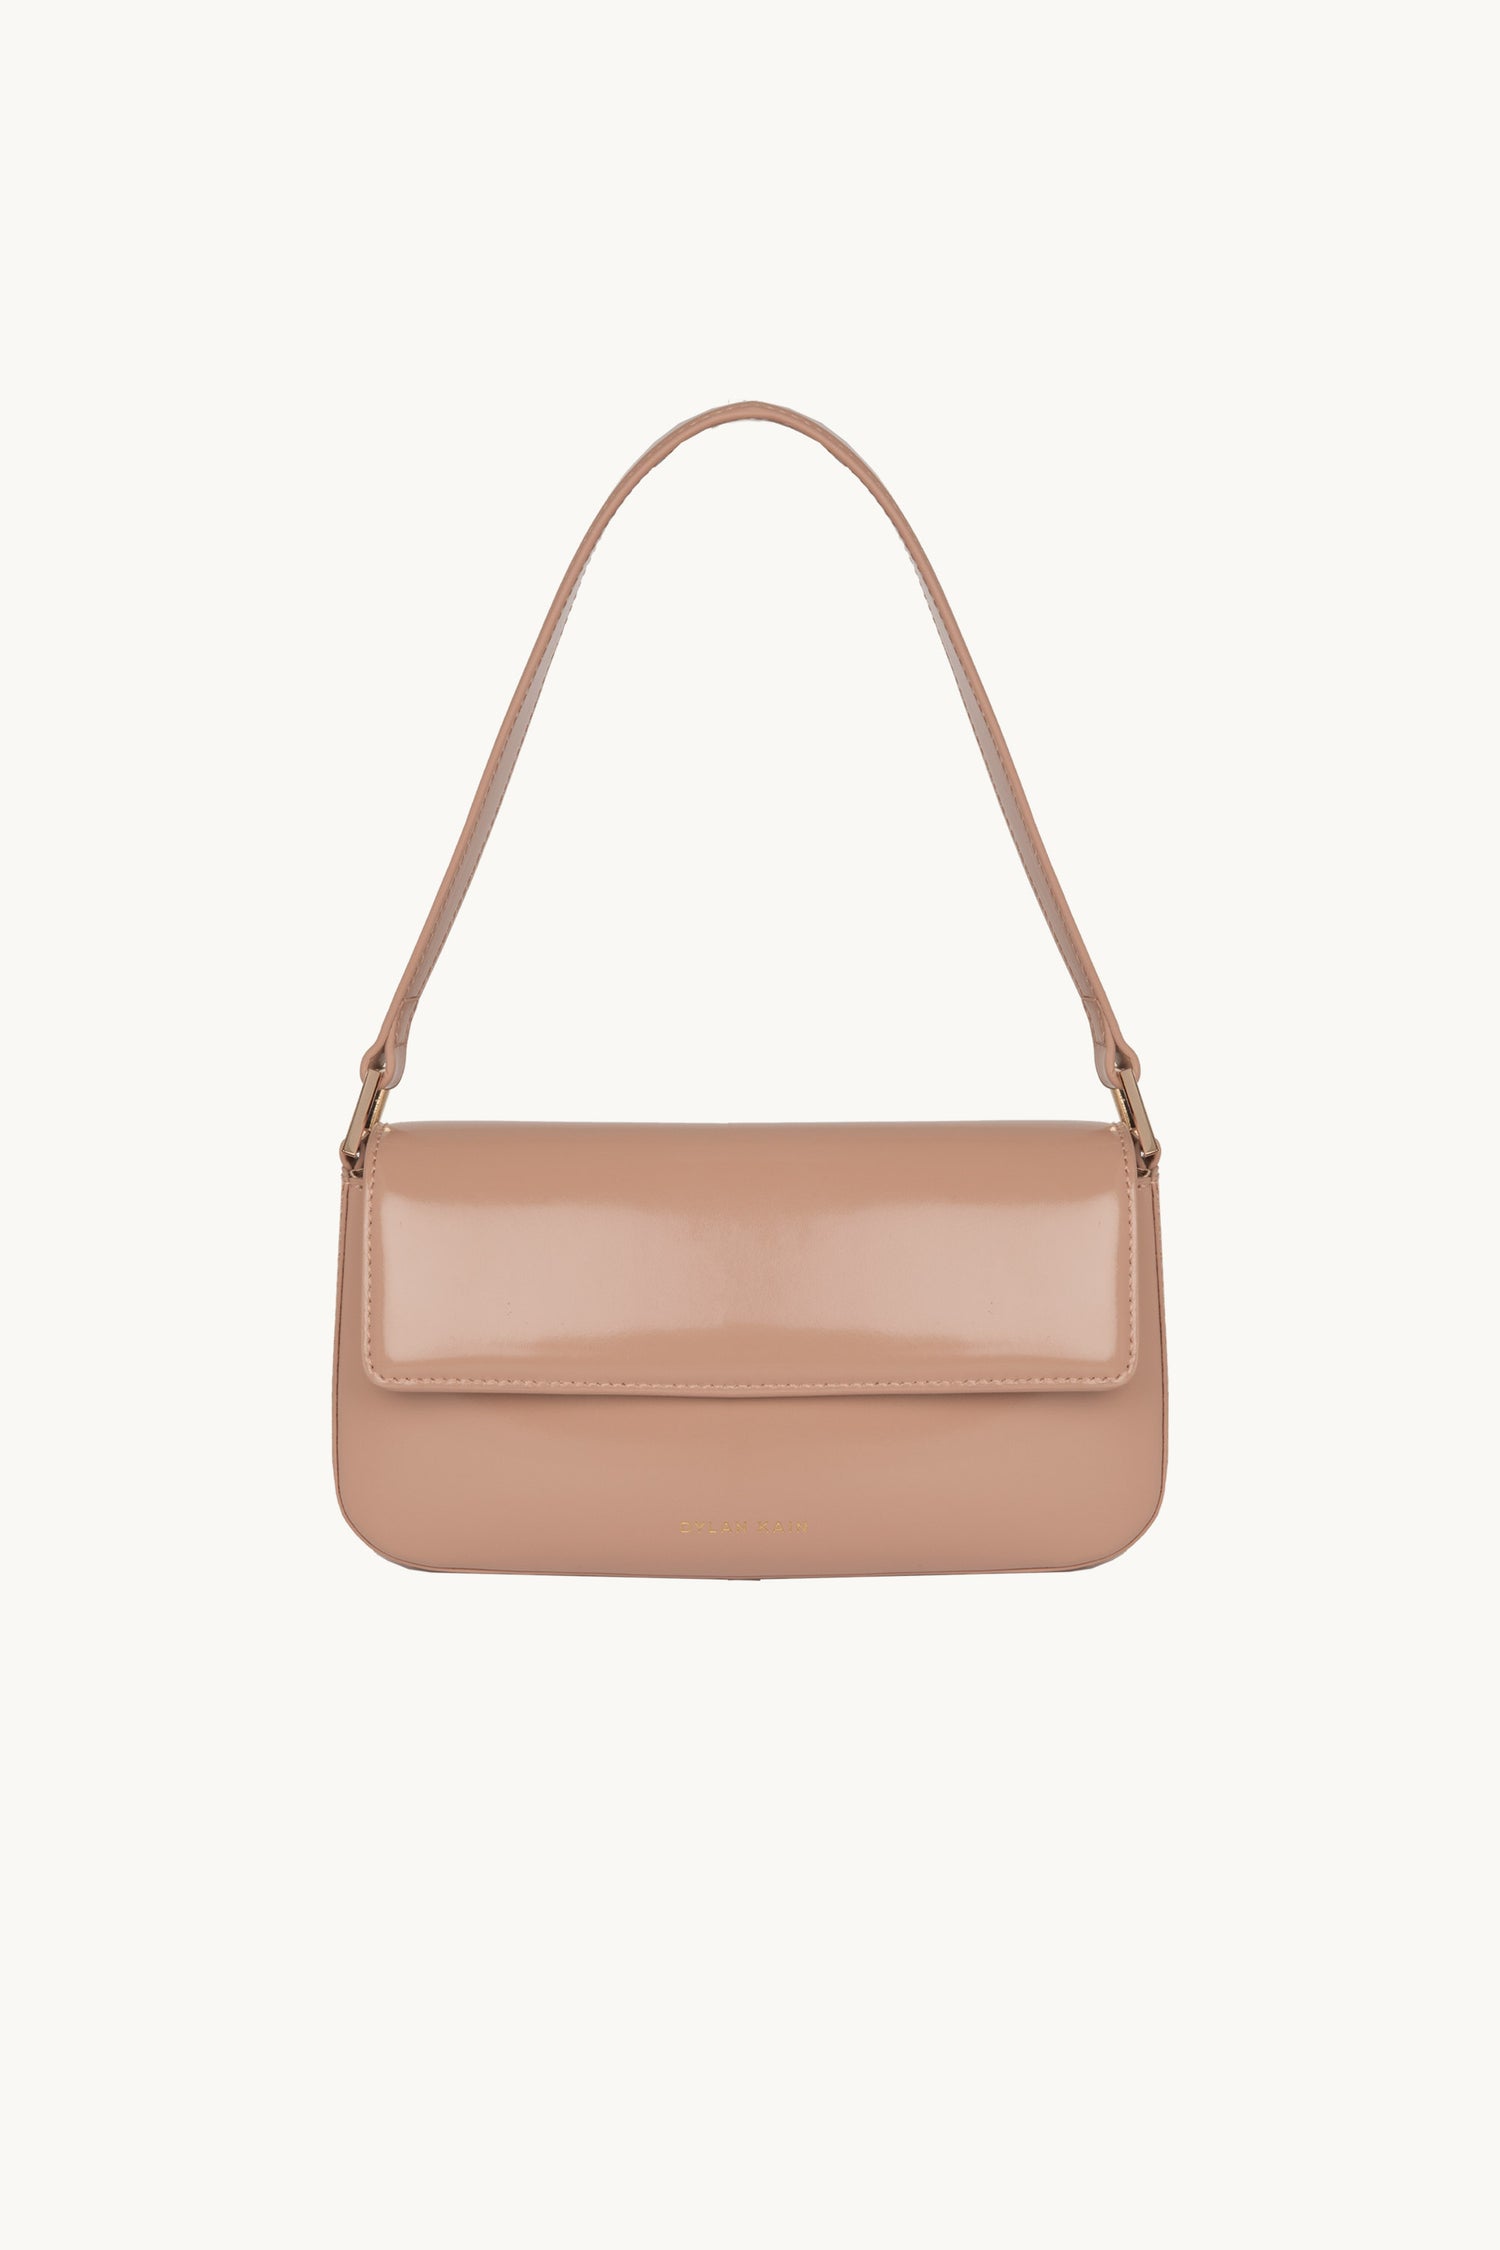 Dylan Kain The Baguette Patent Bag Fawn